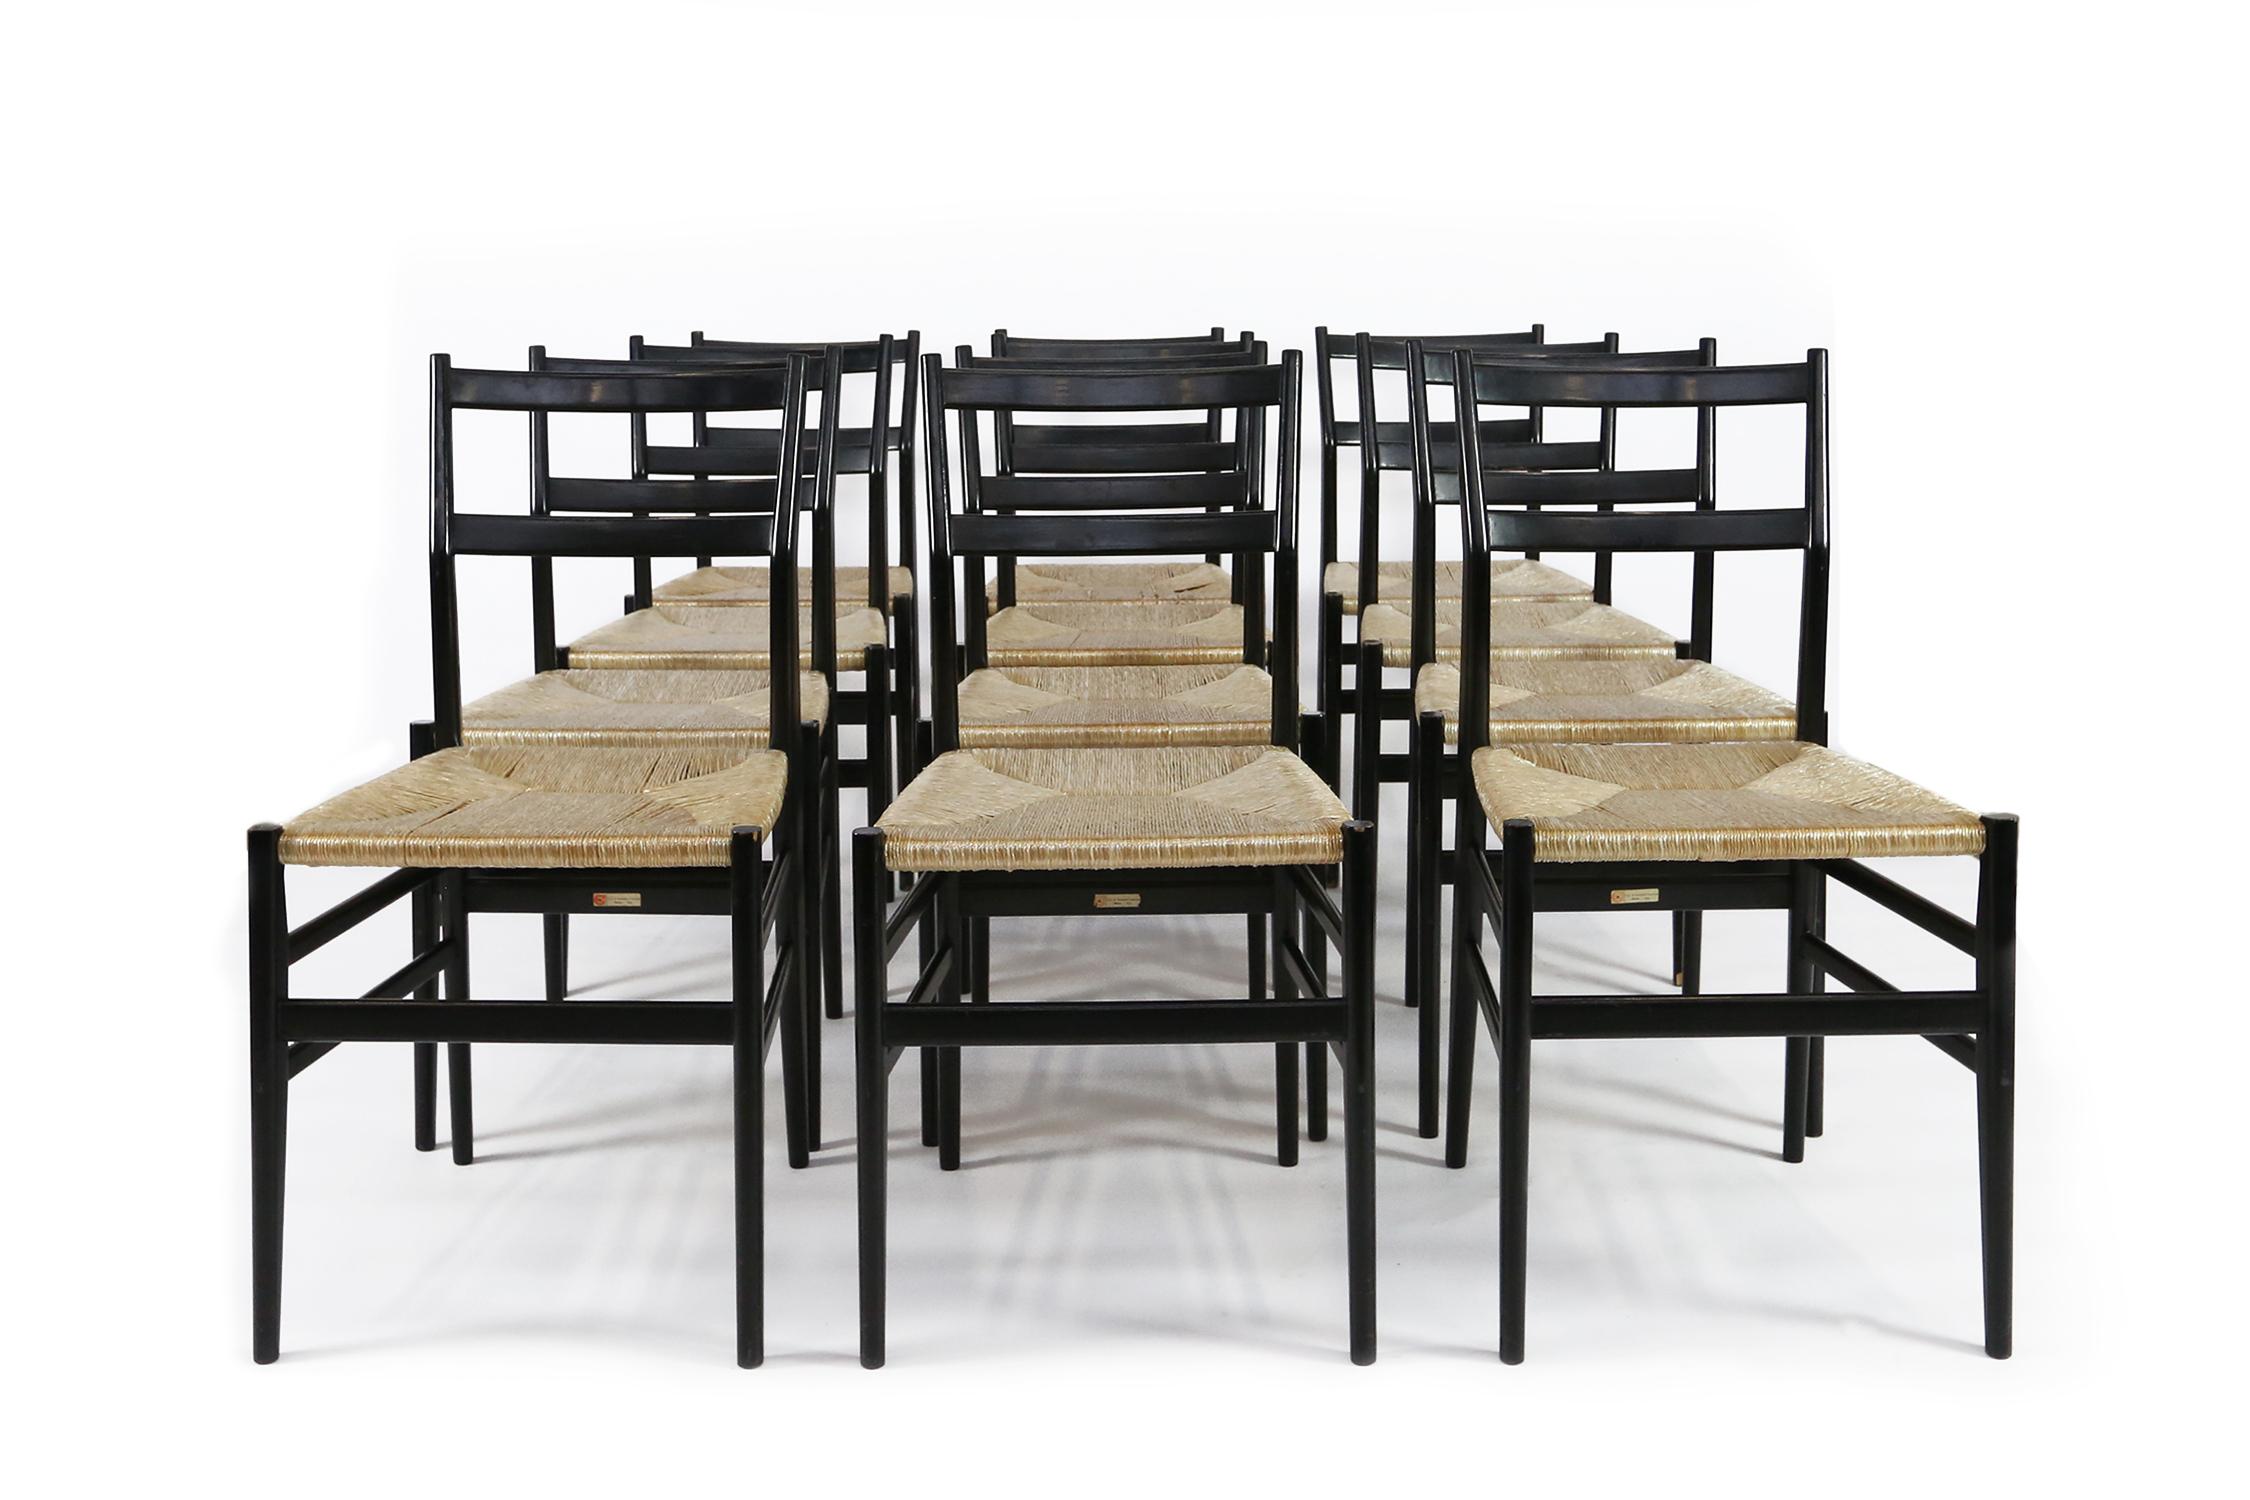 Mid-Century Modern 12 Leggera Chairs by Gio Ponti by Cassina, Milano, 1960s For Sale